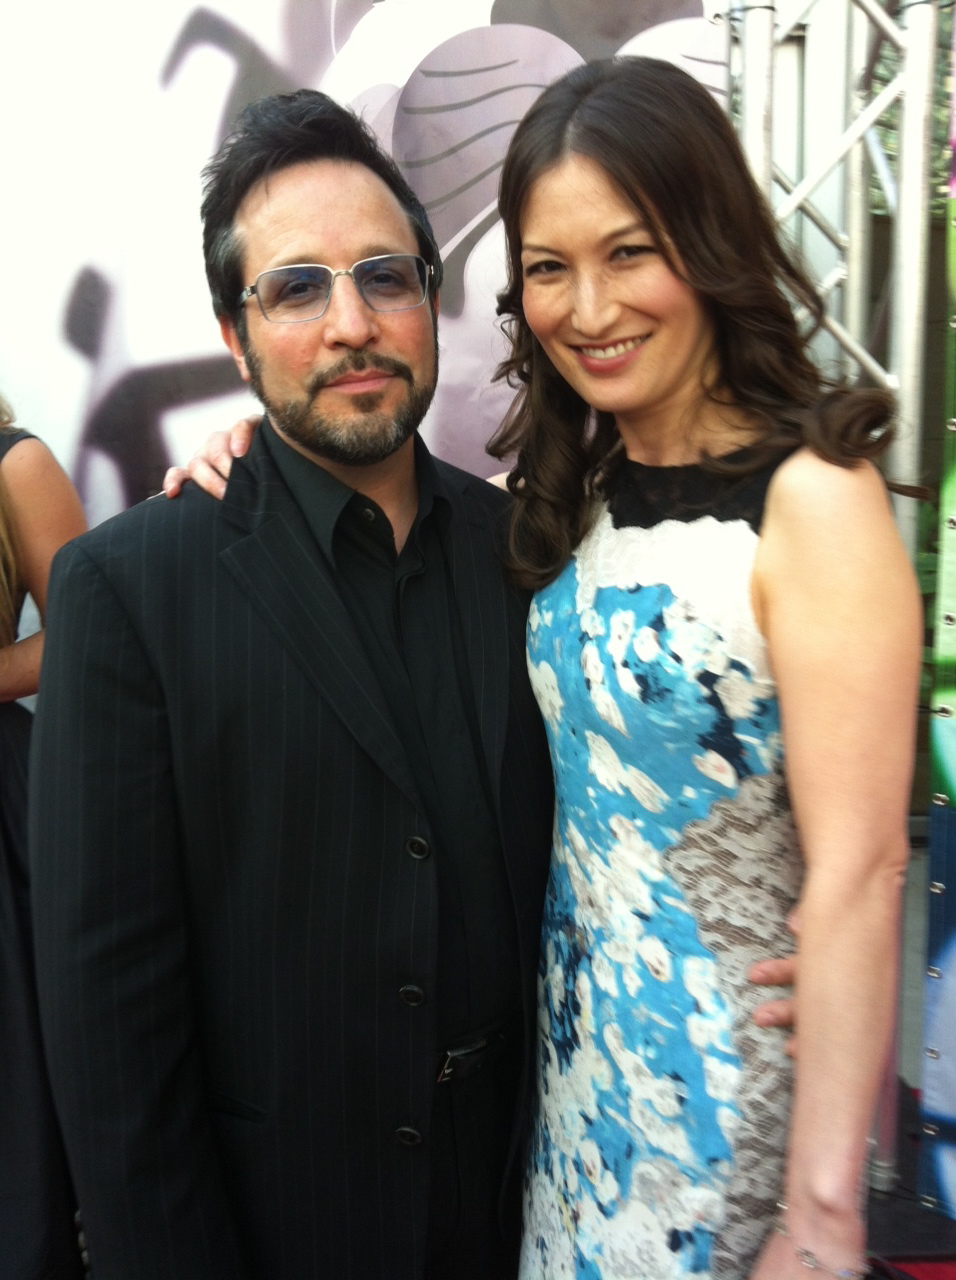 Ben Ratner and wife Jennifer Spence at the 2013 Leo Awards